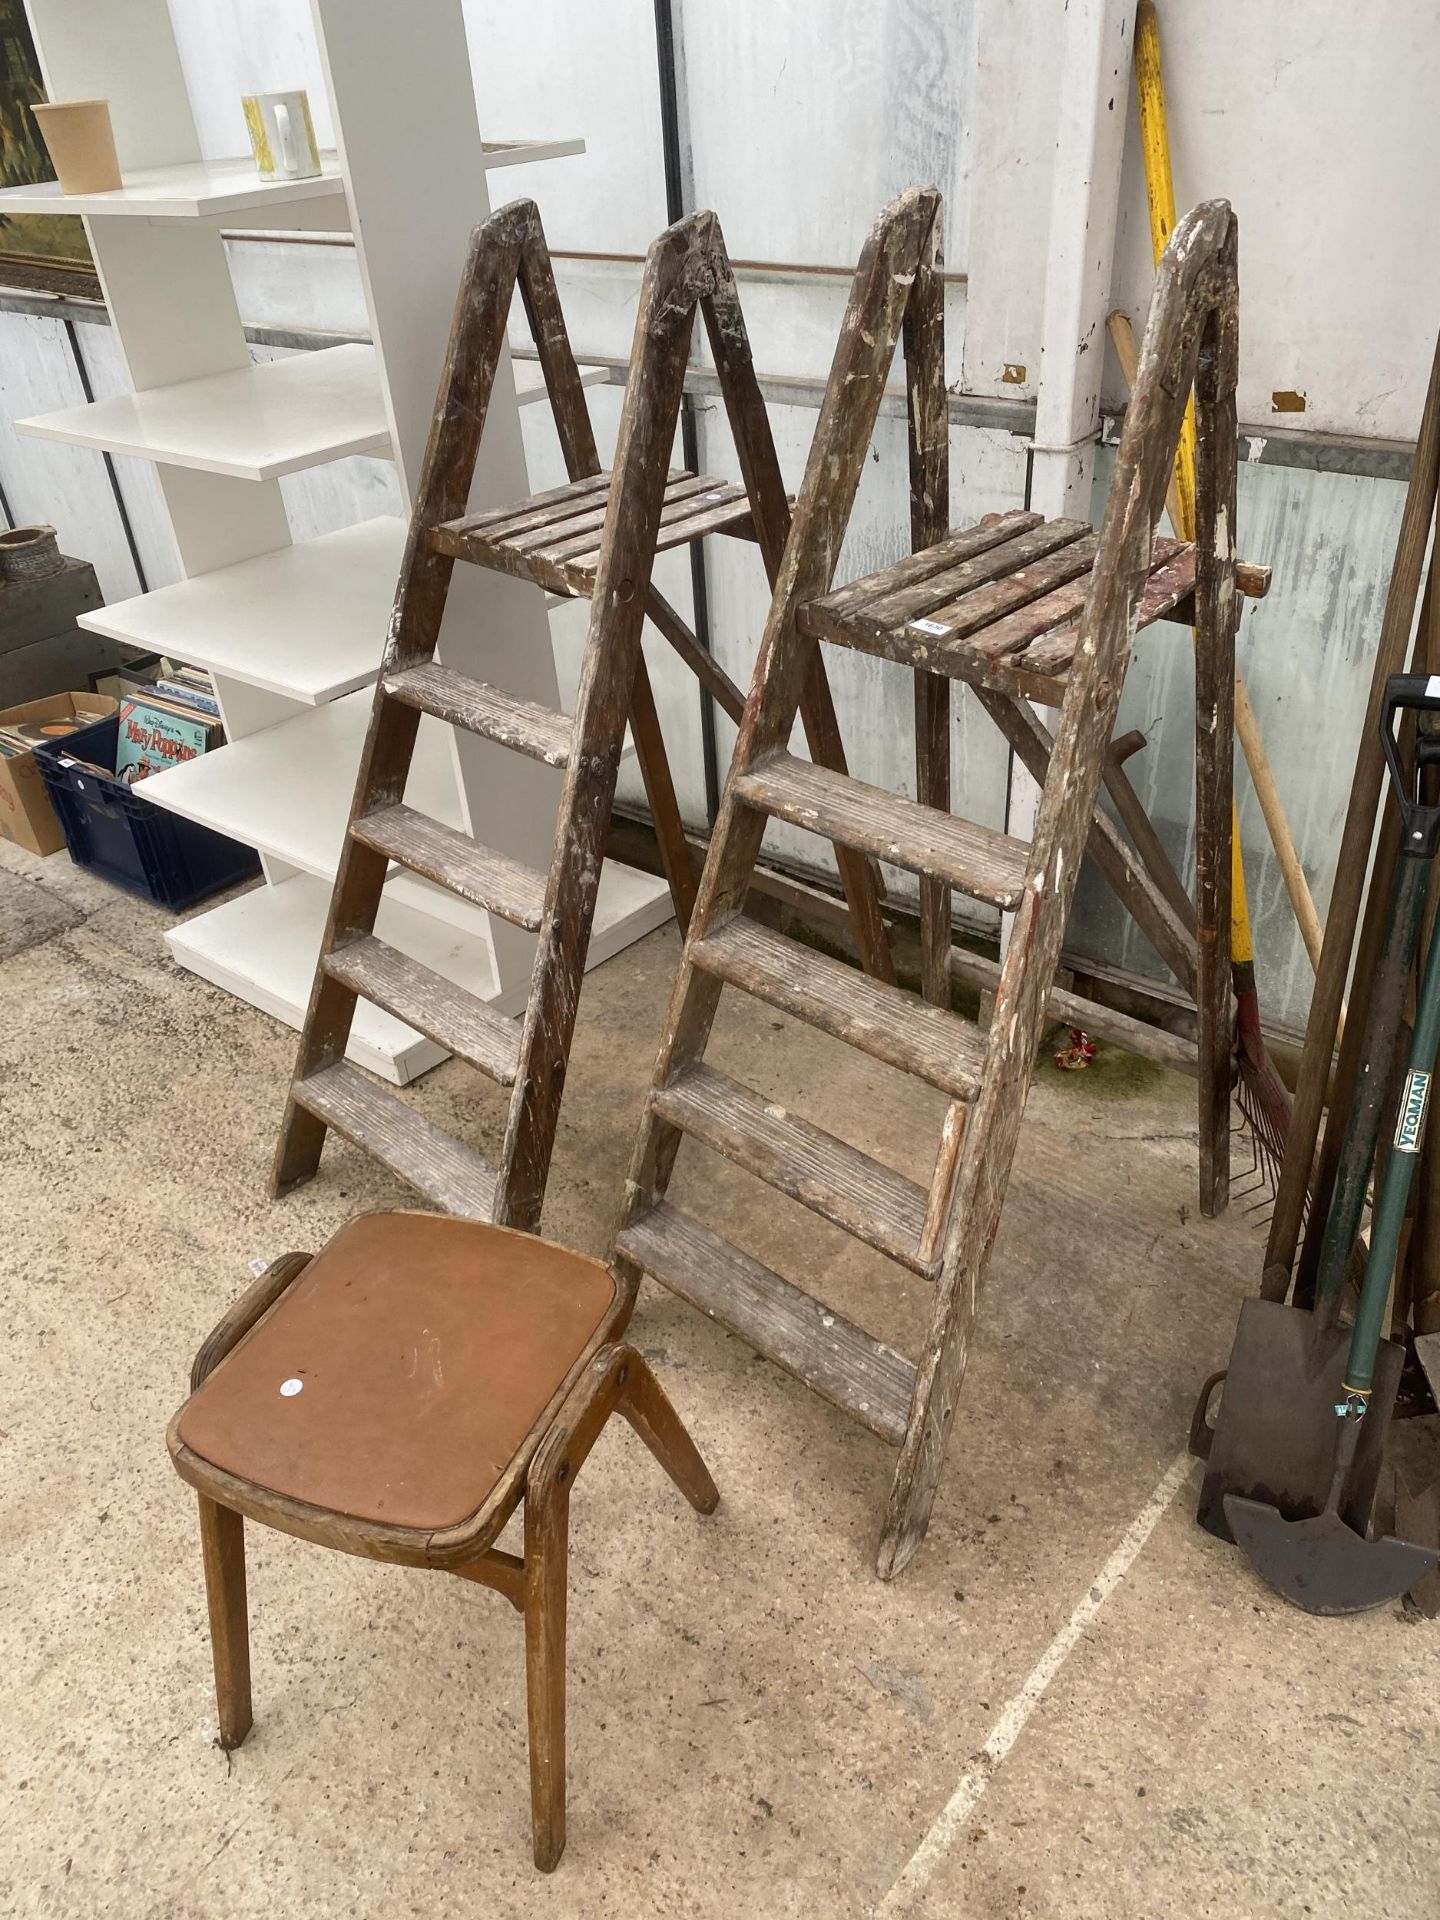 TWO VINTAGE FOUR RUNG WOODEN STEP LADDERS AND A KITCHEN STOOL